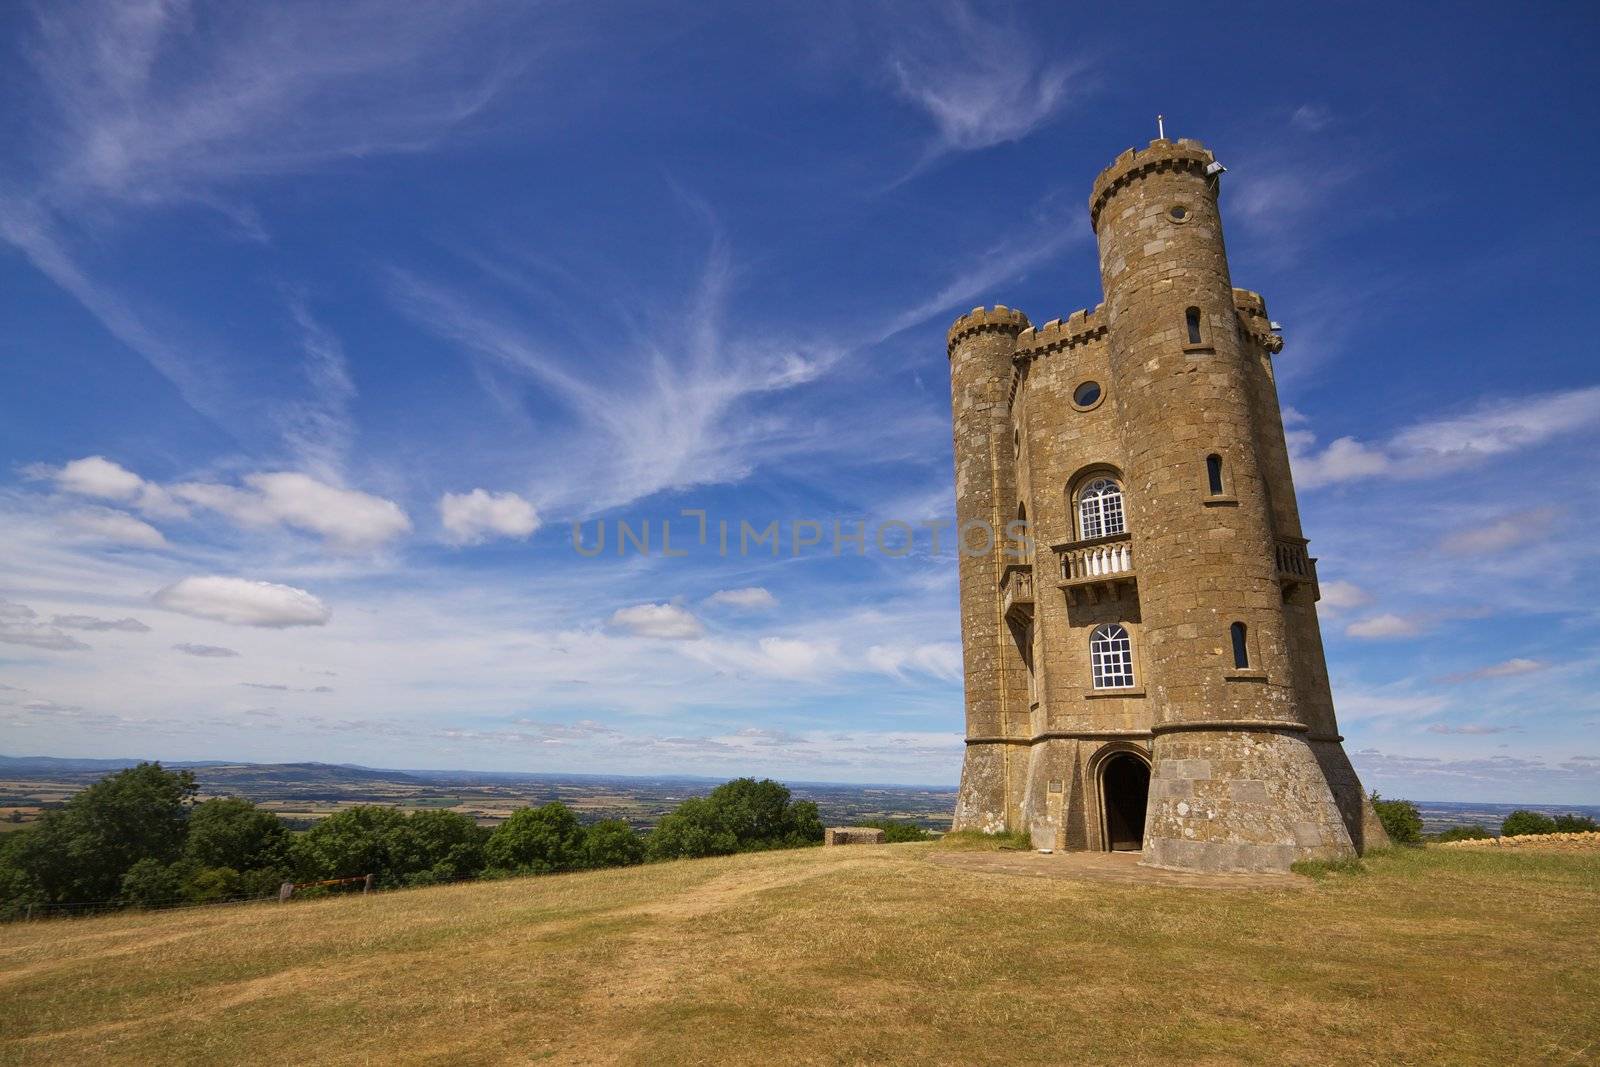 Broadway Tower by Harvepino